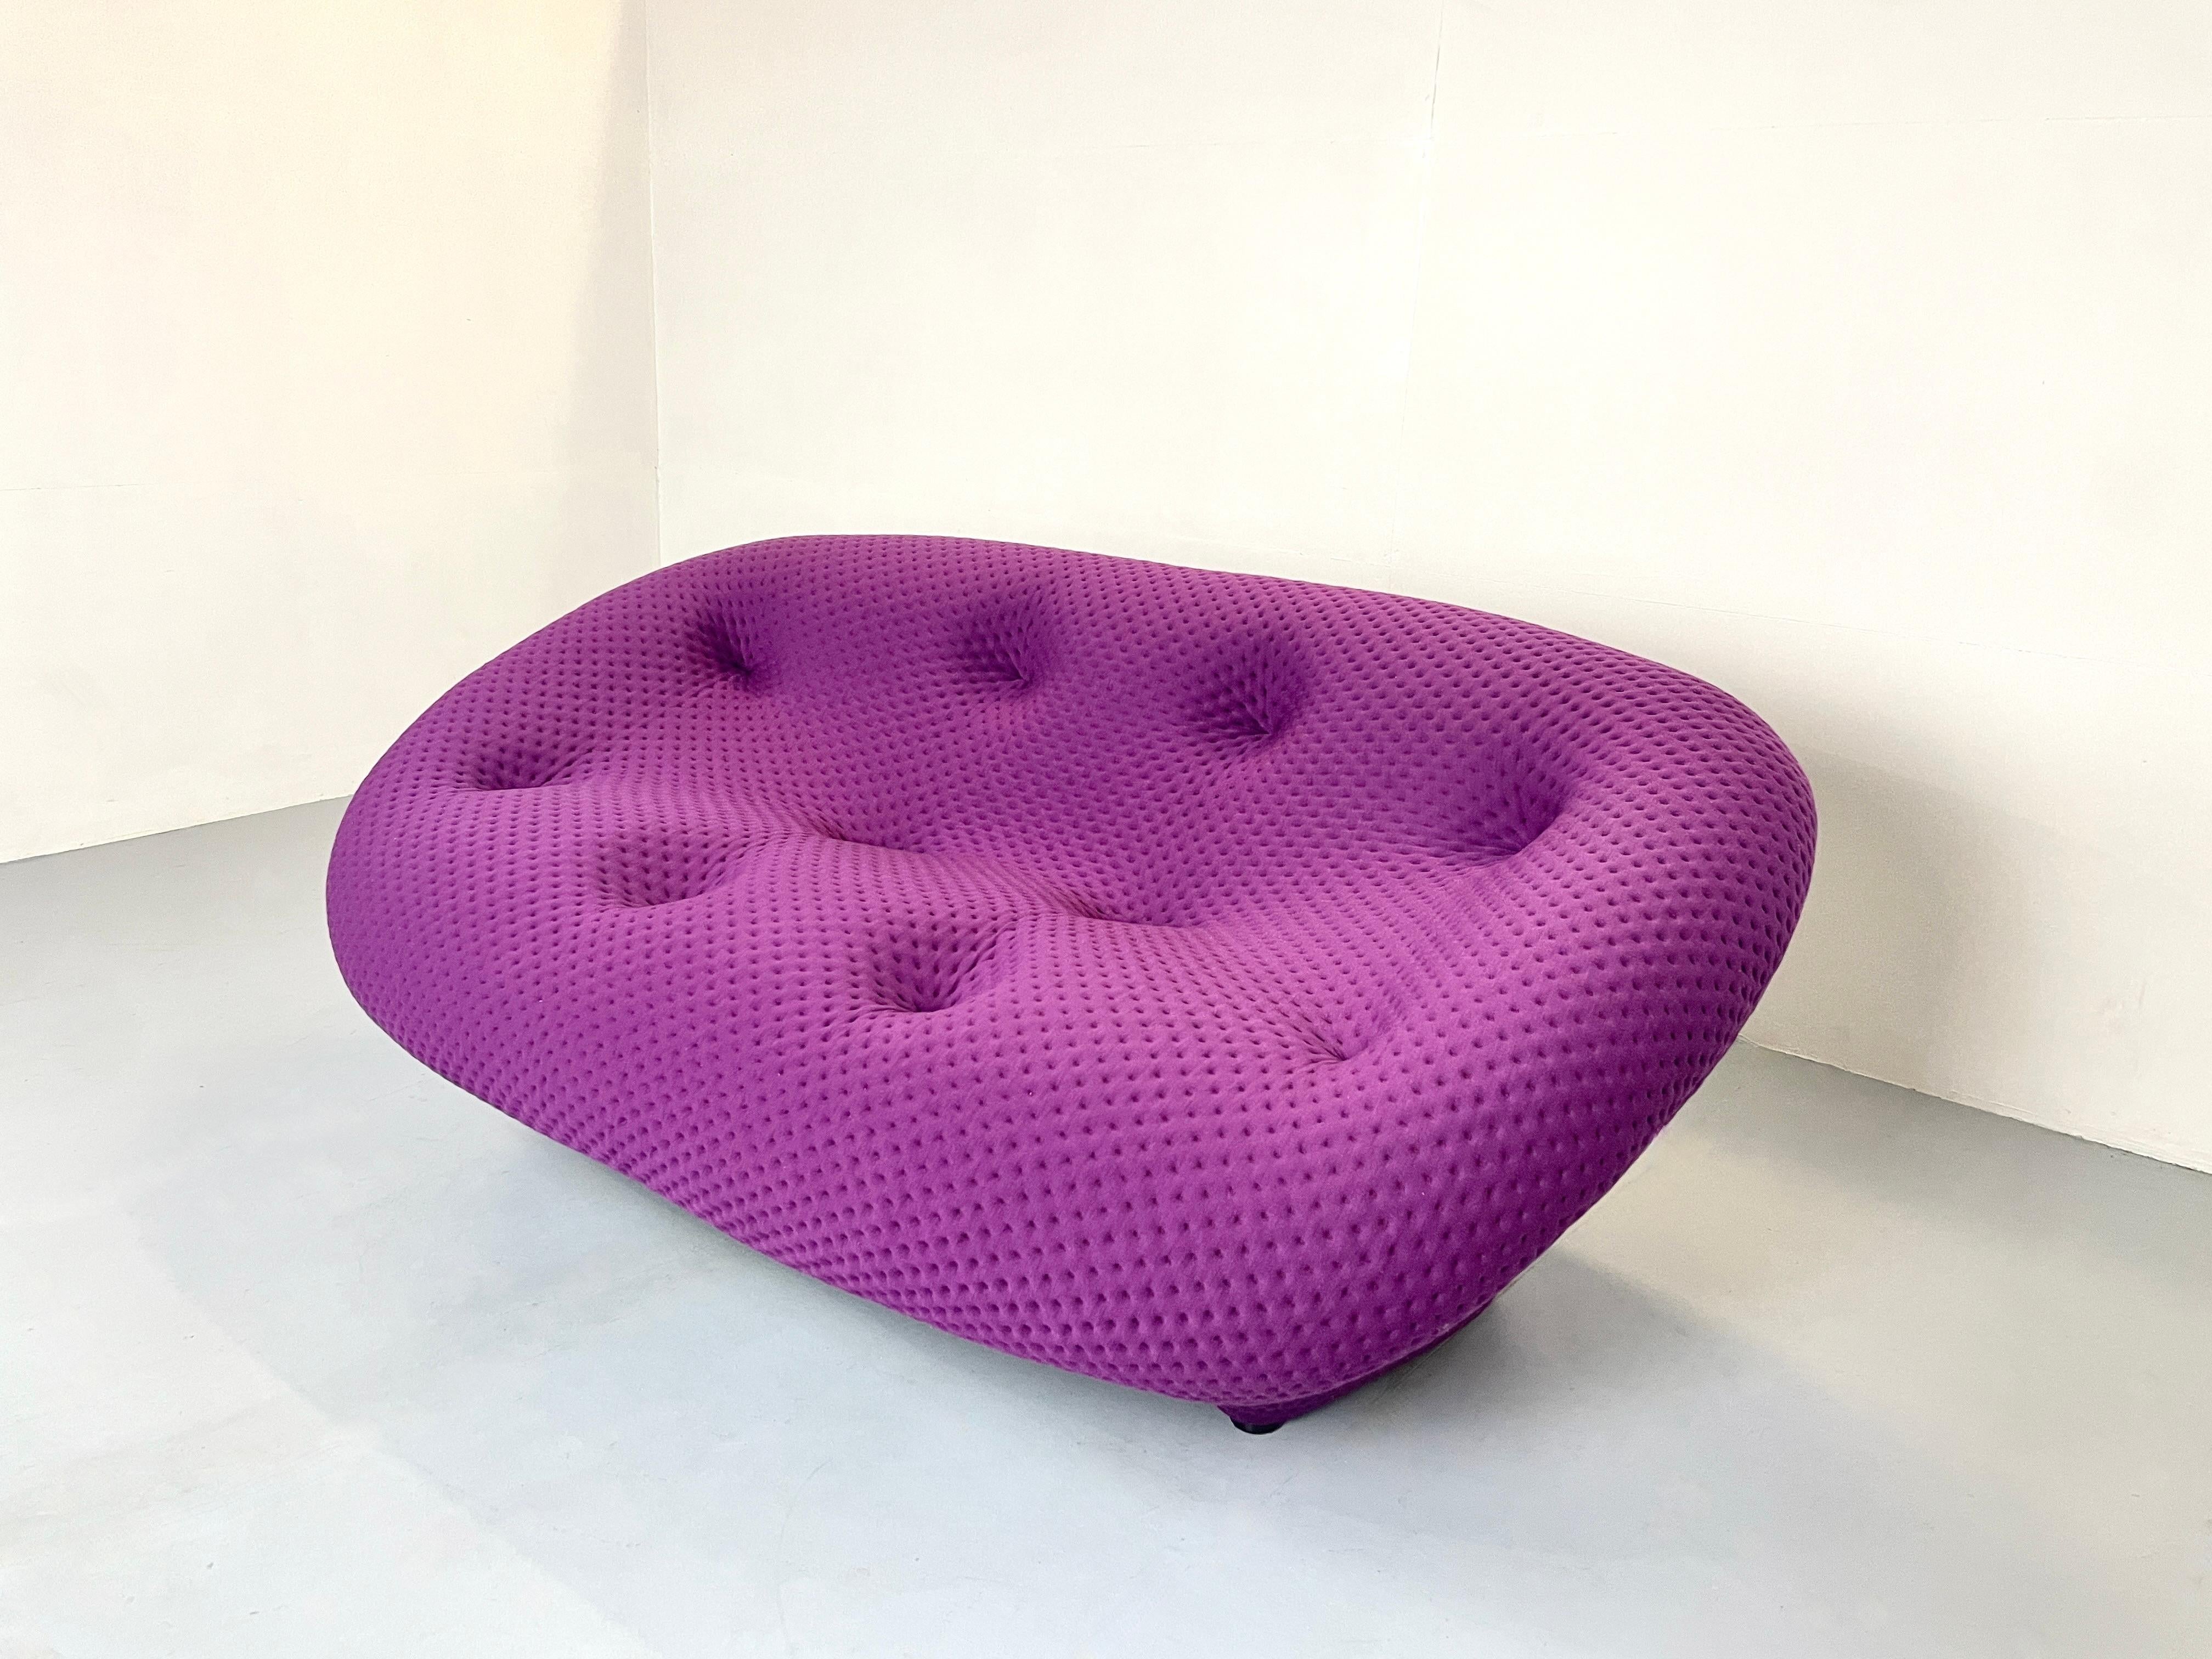 Designer Ronan and Erwan Bourellec


The Ligne Roset Ploum is an extremely comfortable sofa made of extra supple foam in combination with a stretch lining. The couch invites you to linger. The backrest and the seat are upholstered, which gives the